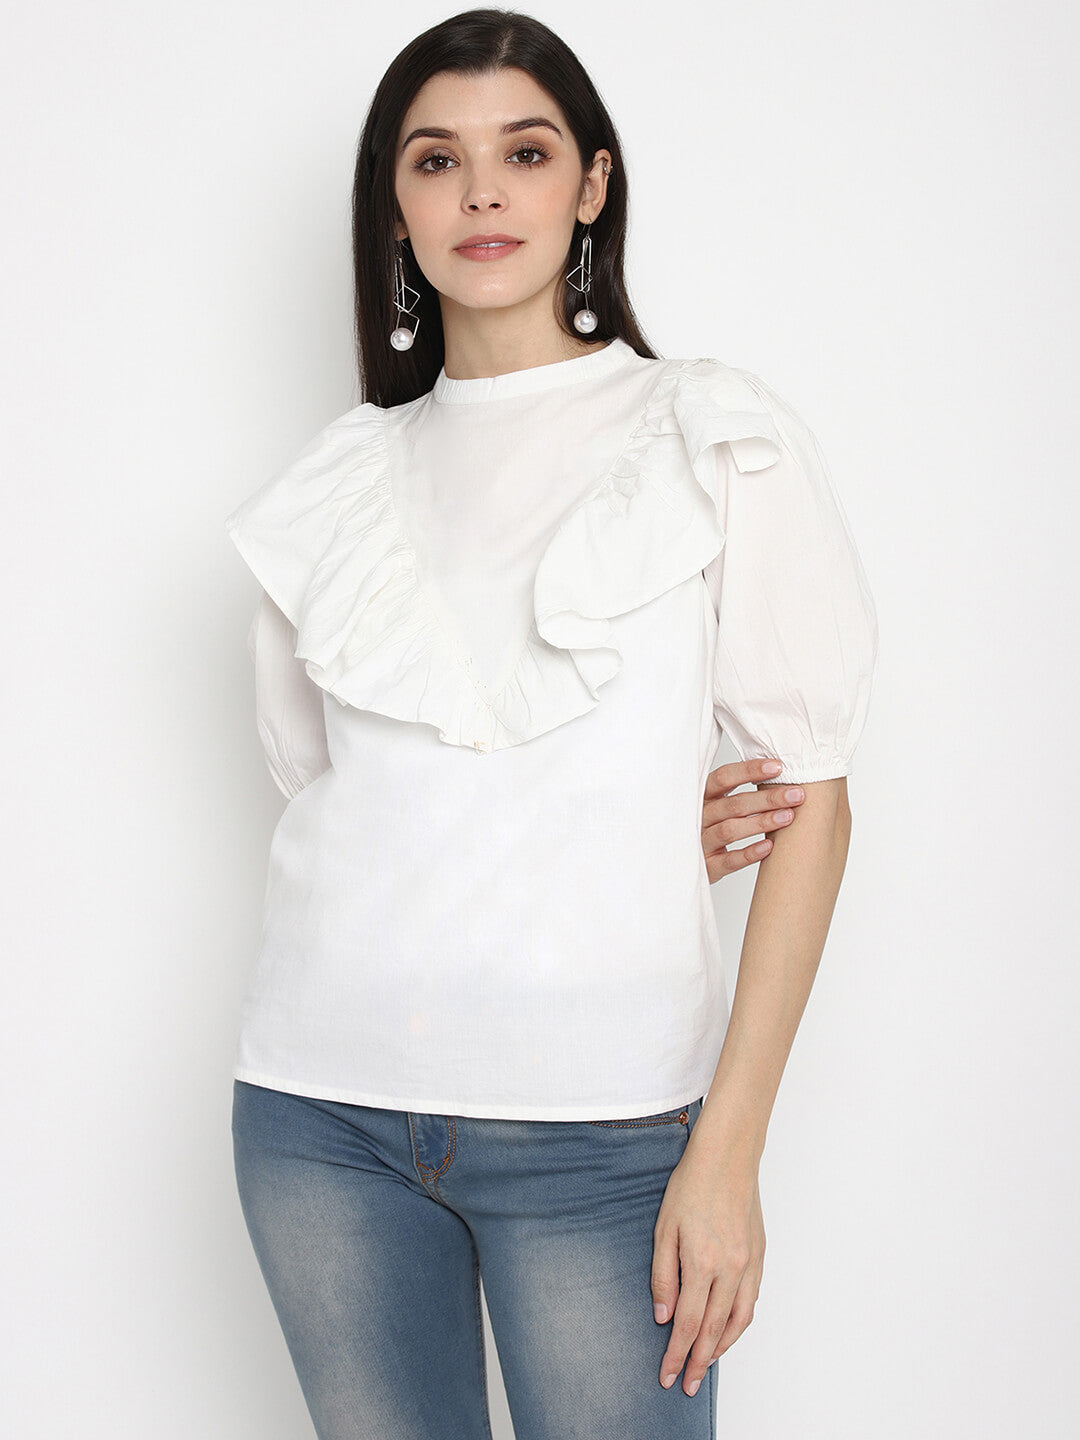 White Solid Cotton Poplin Top With Ruffles At Yoke